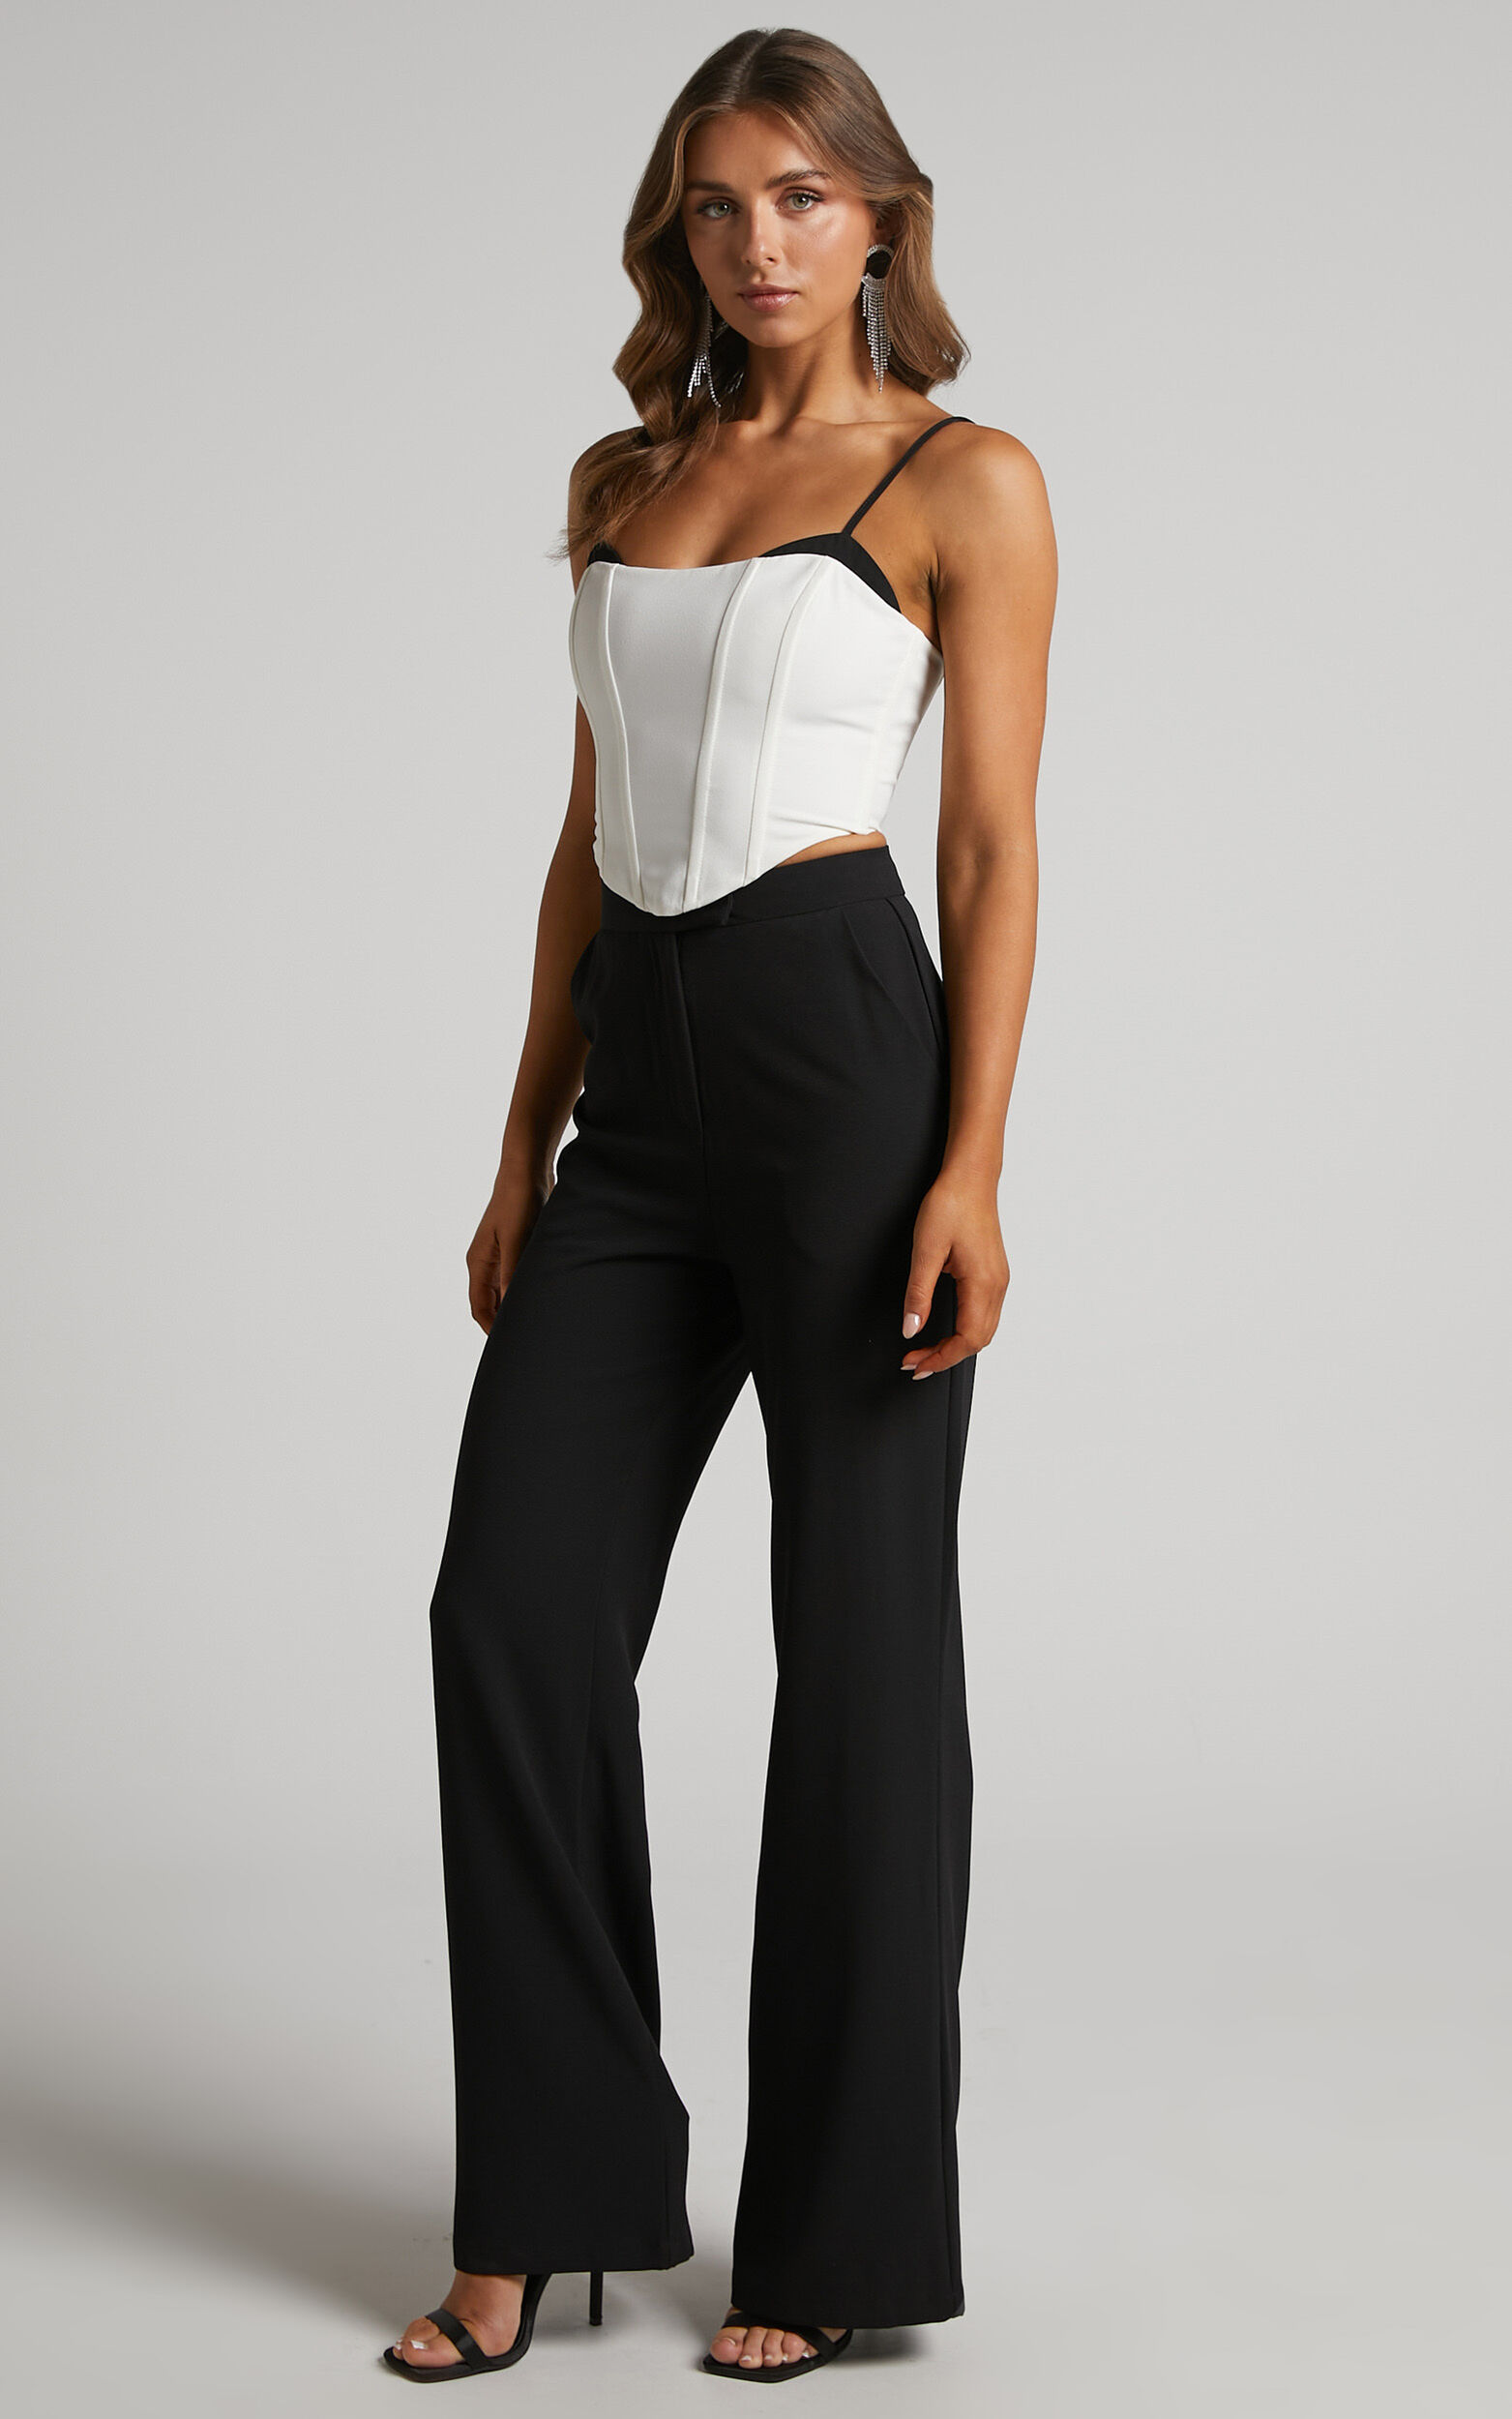 Kimmay Pants - High Waisted Tailored Straight Leg Pants in Black - 04, BLK1